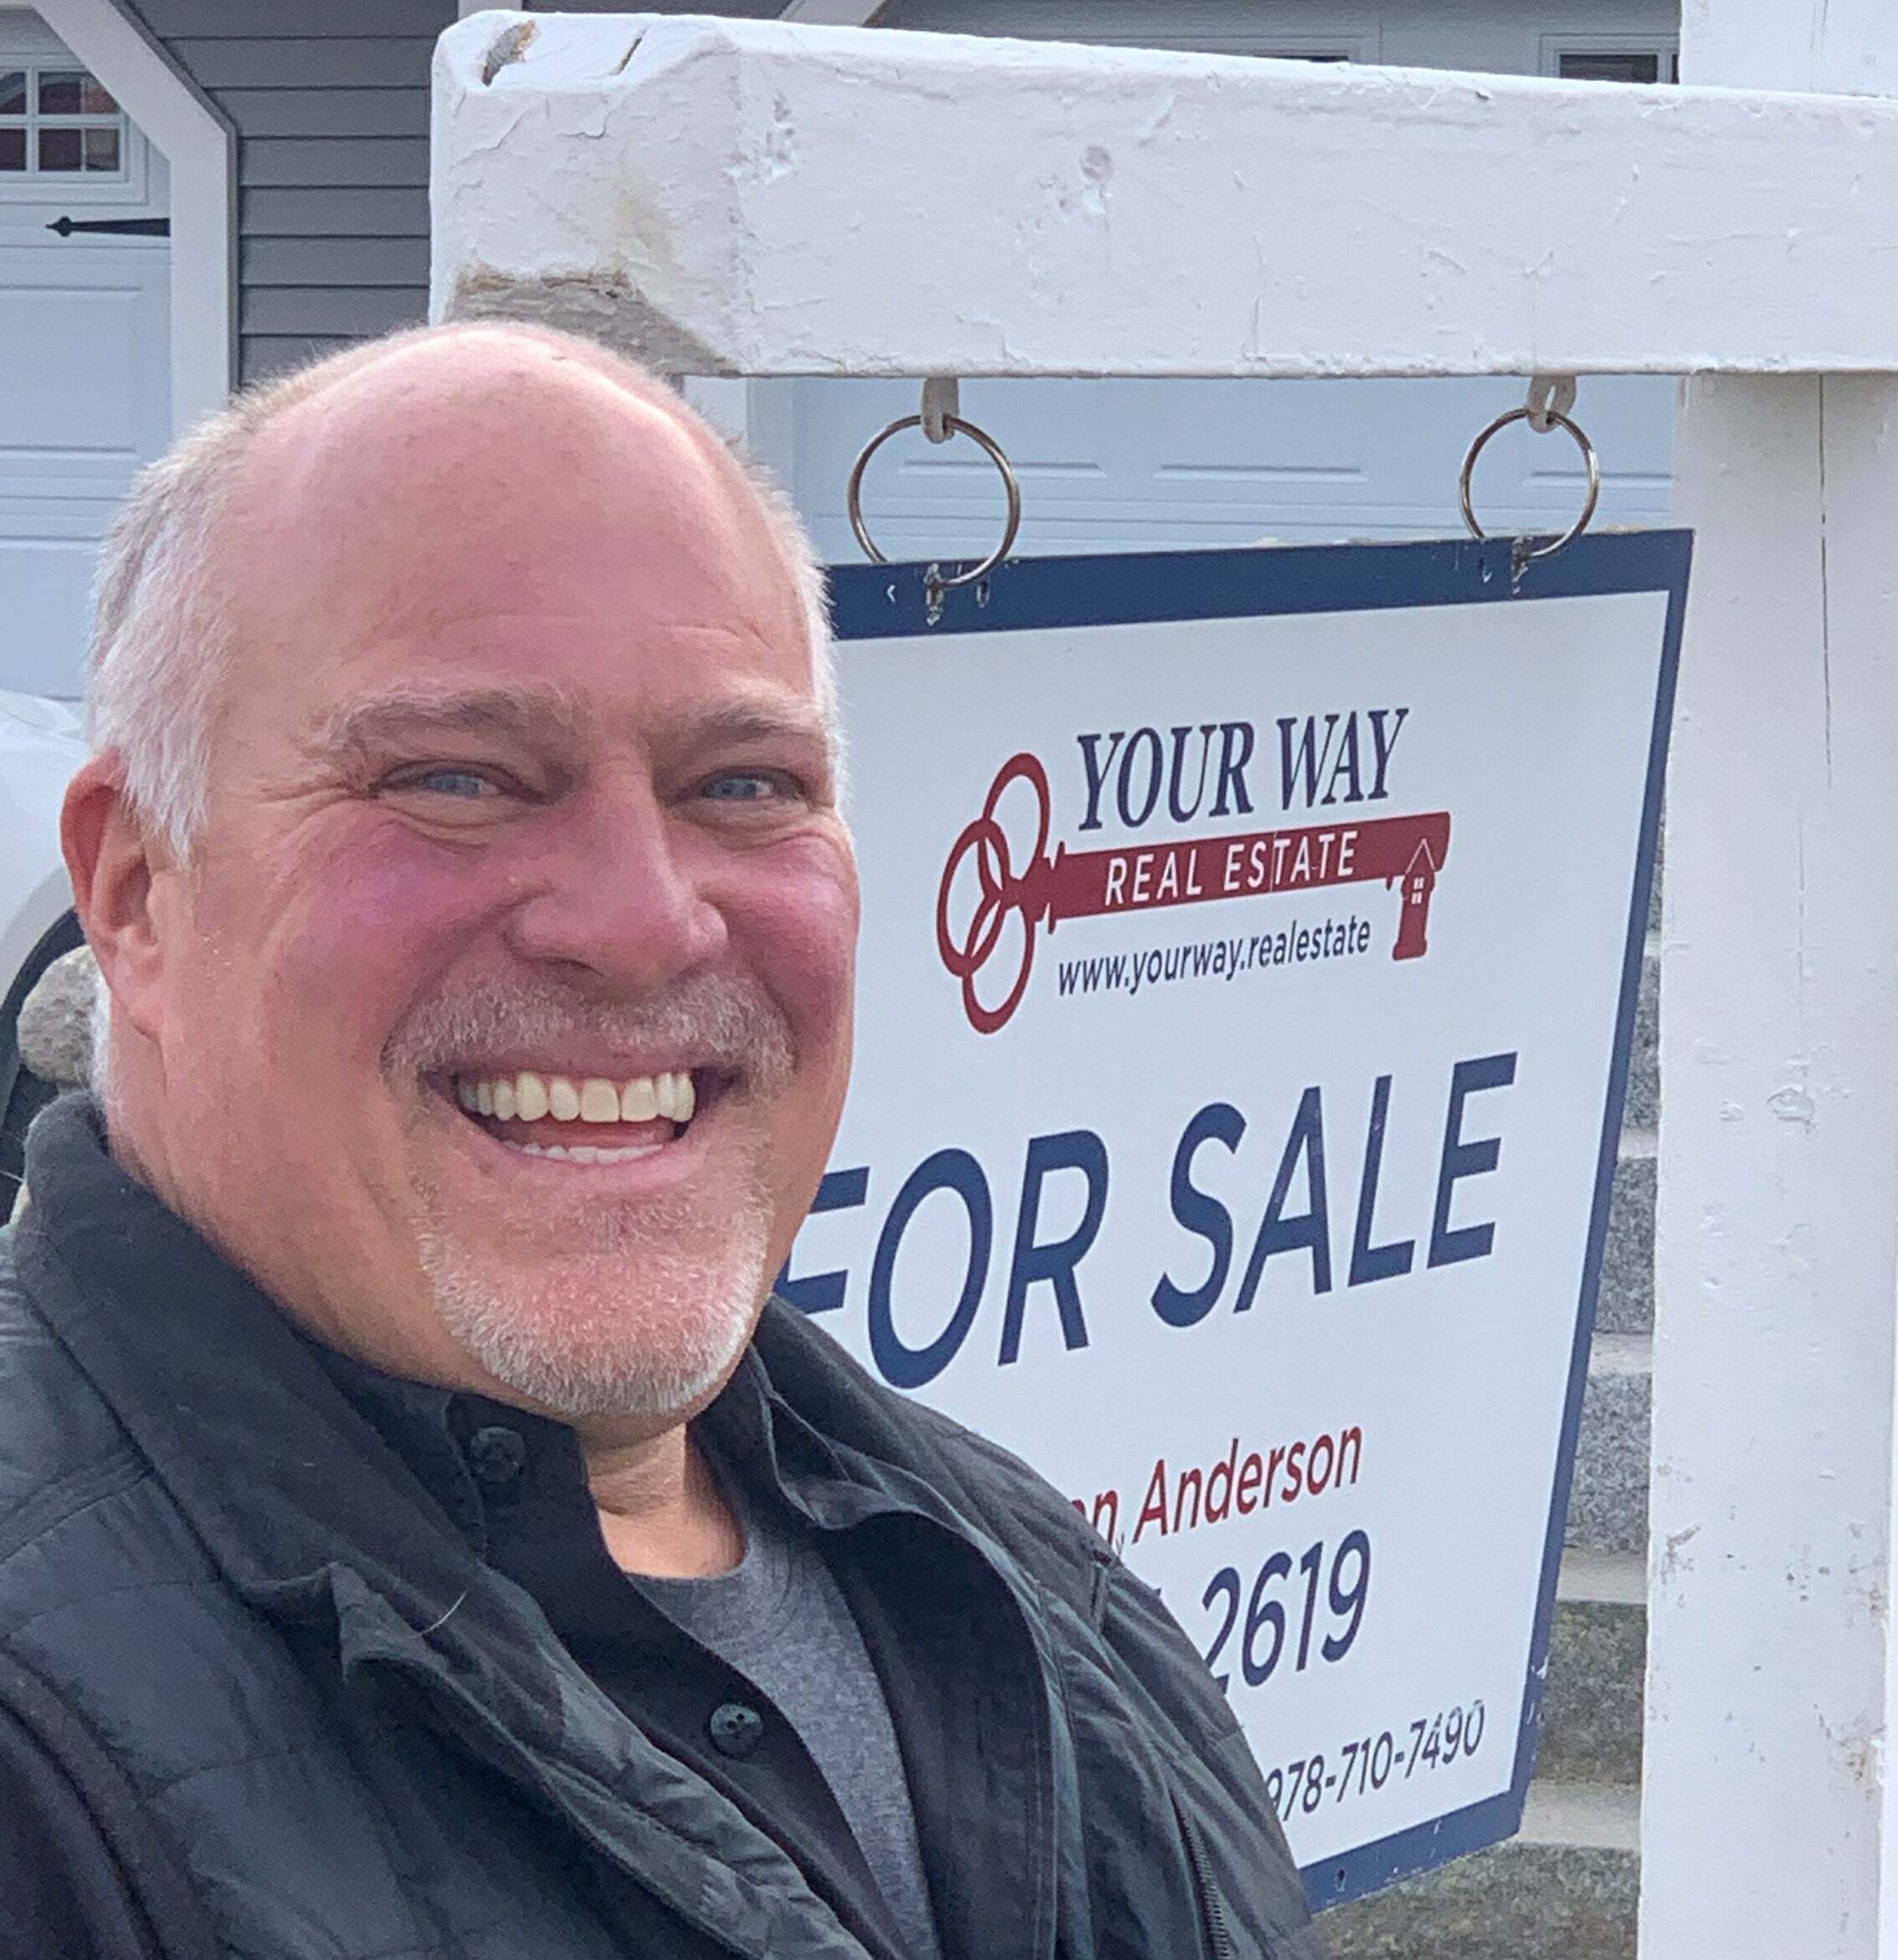 Howard Allgaier, Real Estate Salesperson in Chelmsford, Your Way